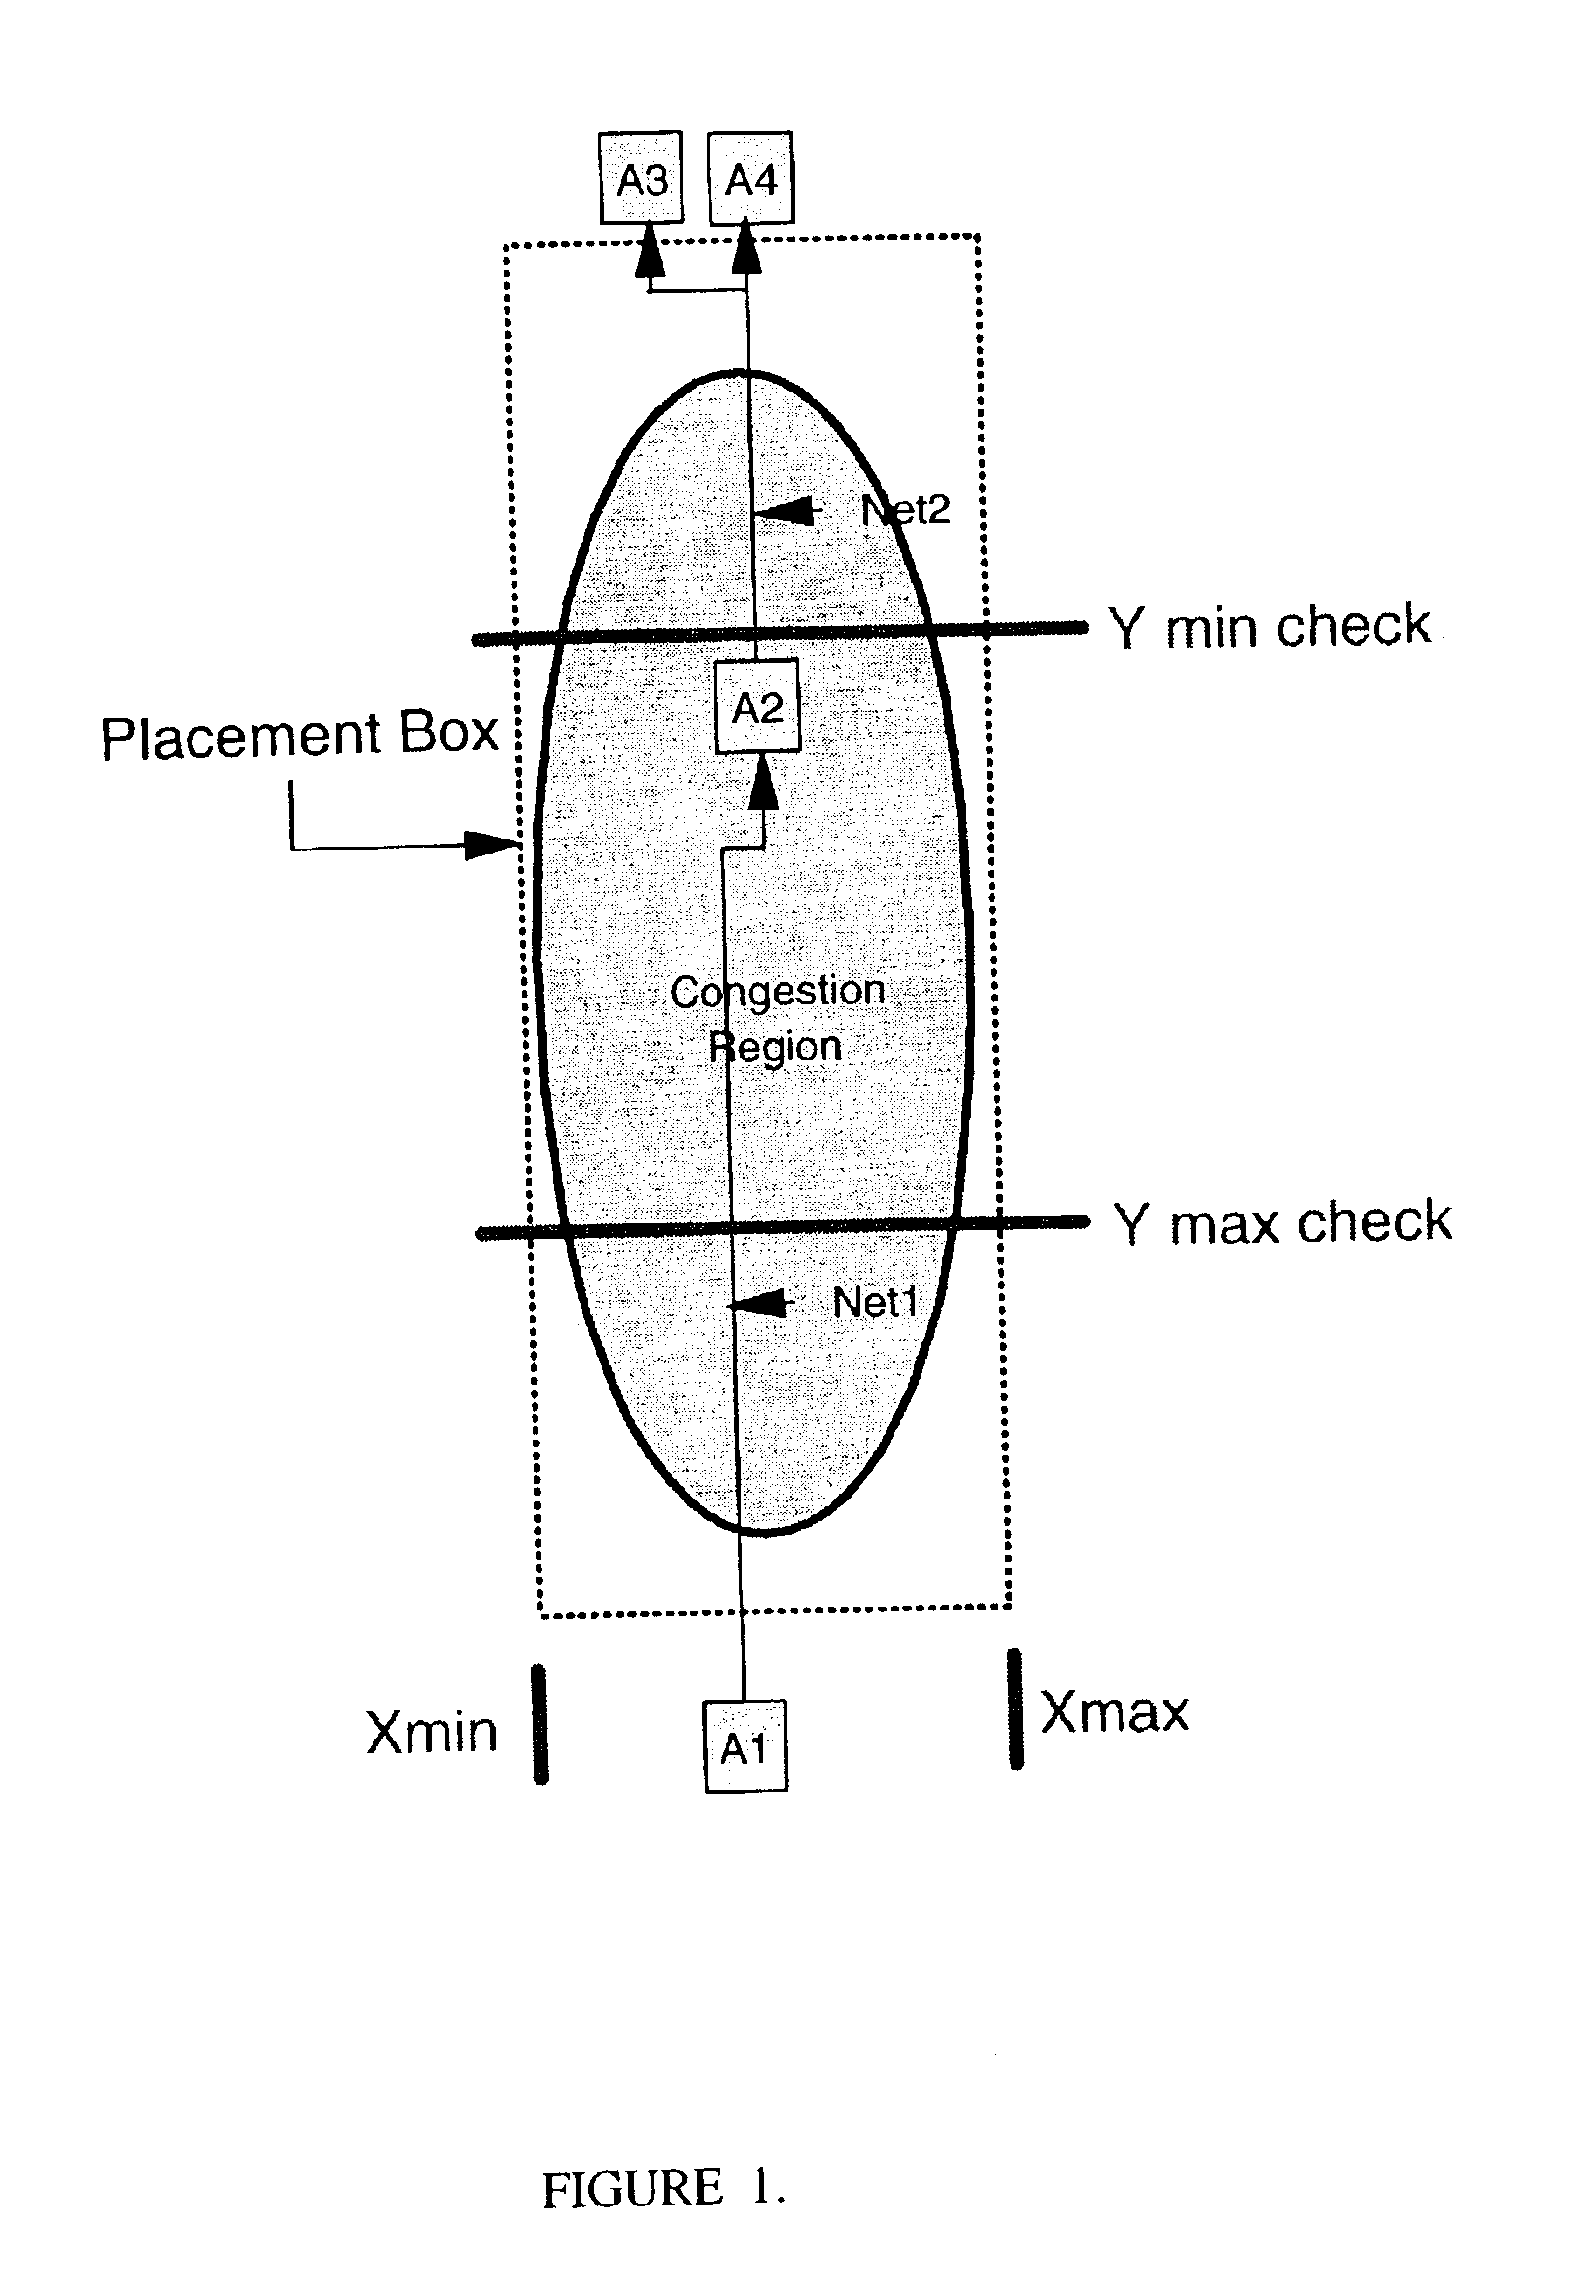 Method for identification and removal of non-timing critical wire routes from congestion region